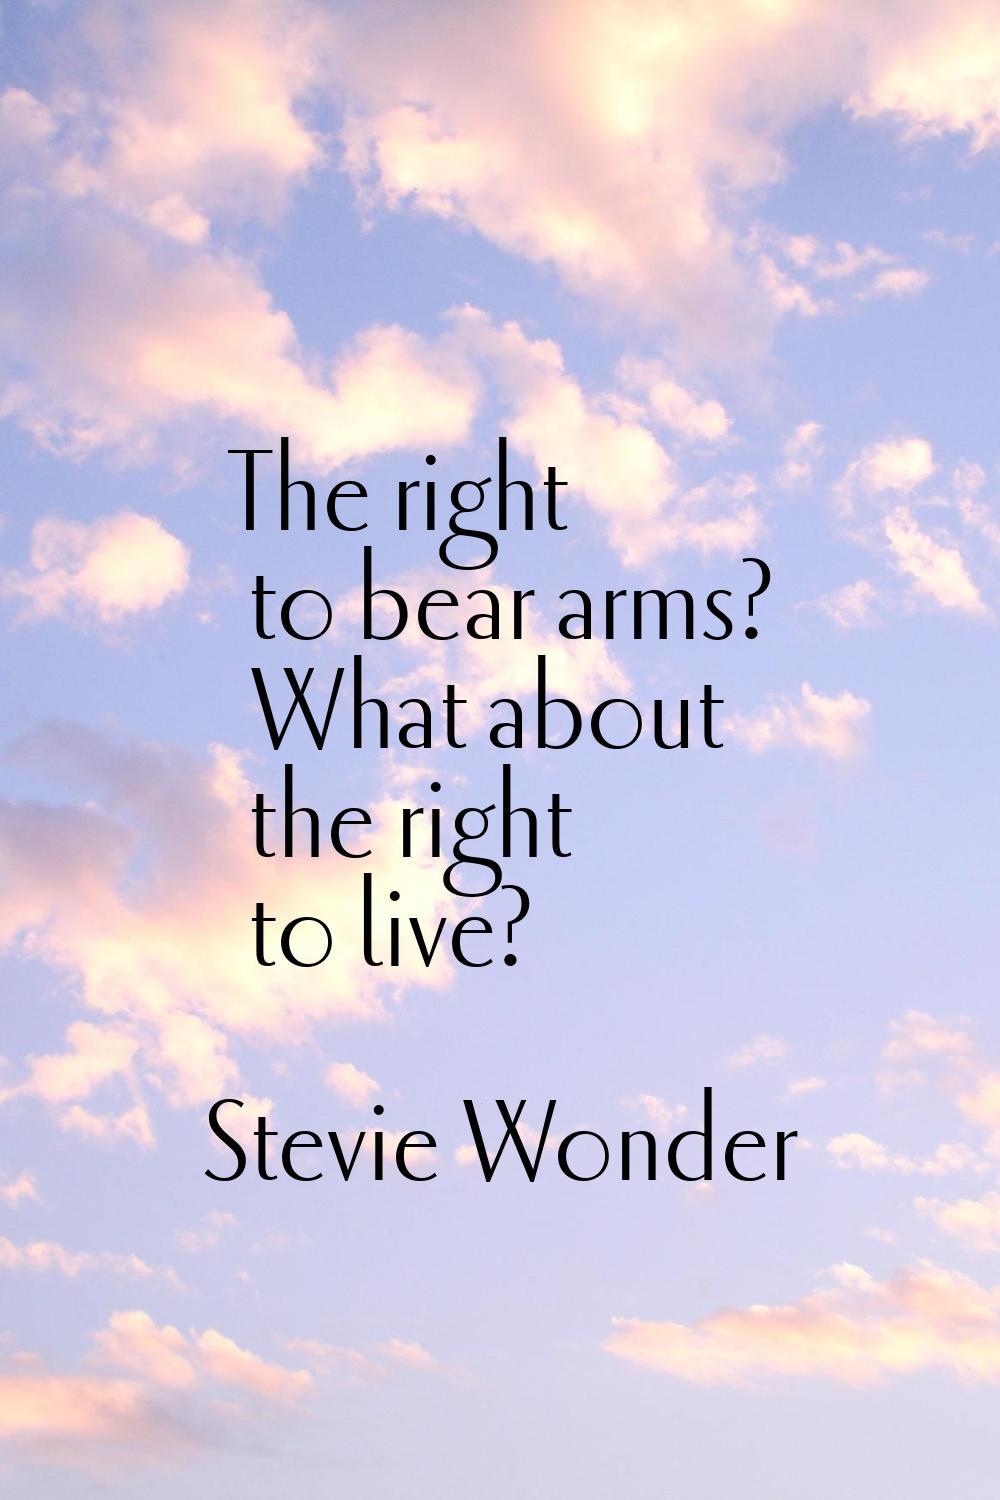 The right to bear arms? What about the right to live?